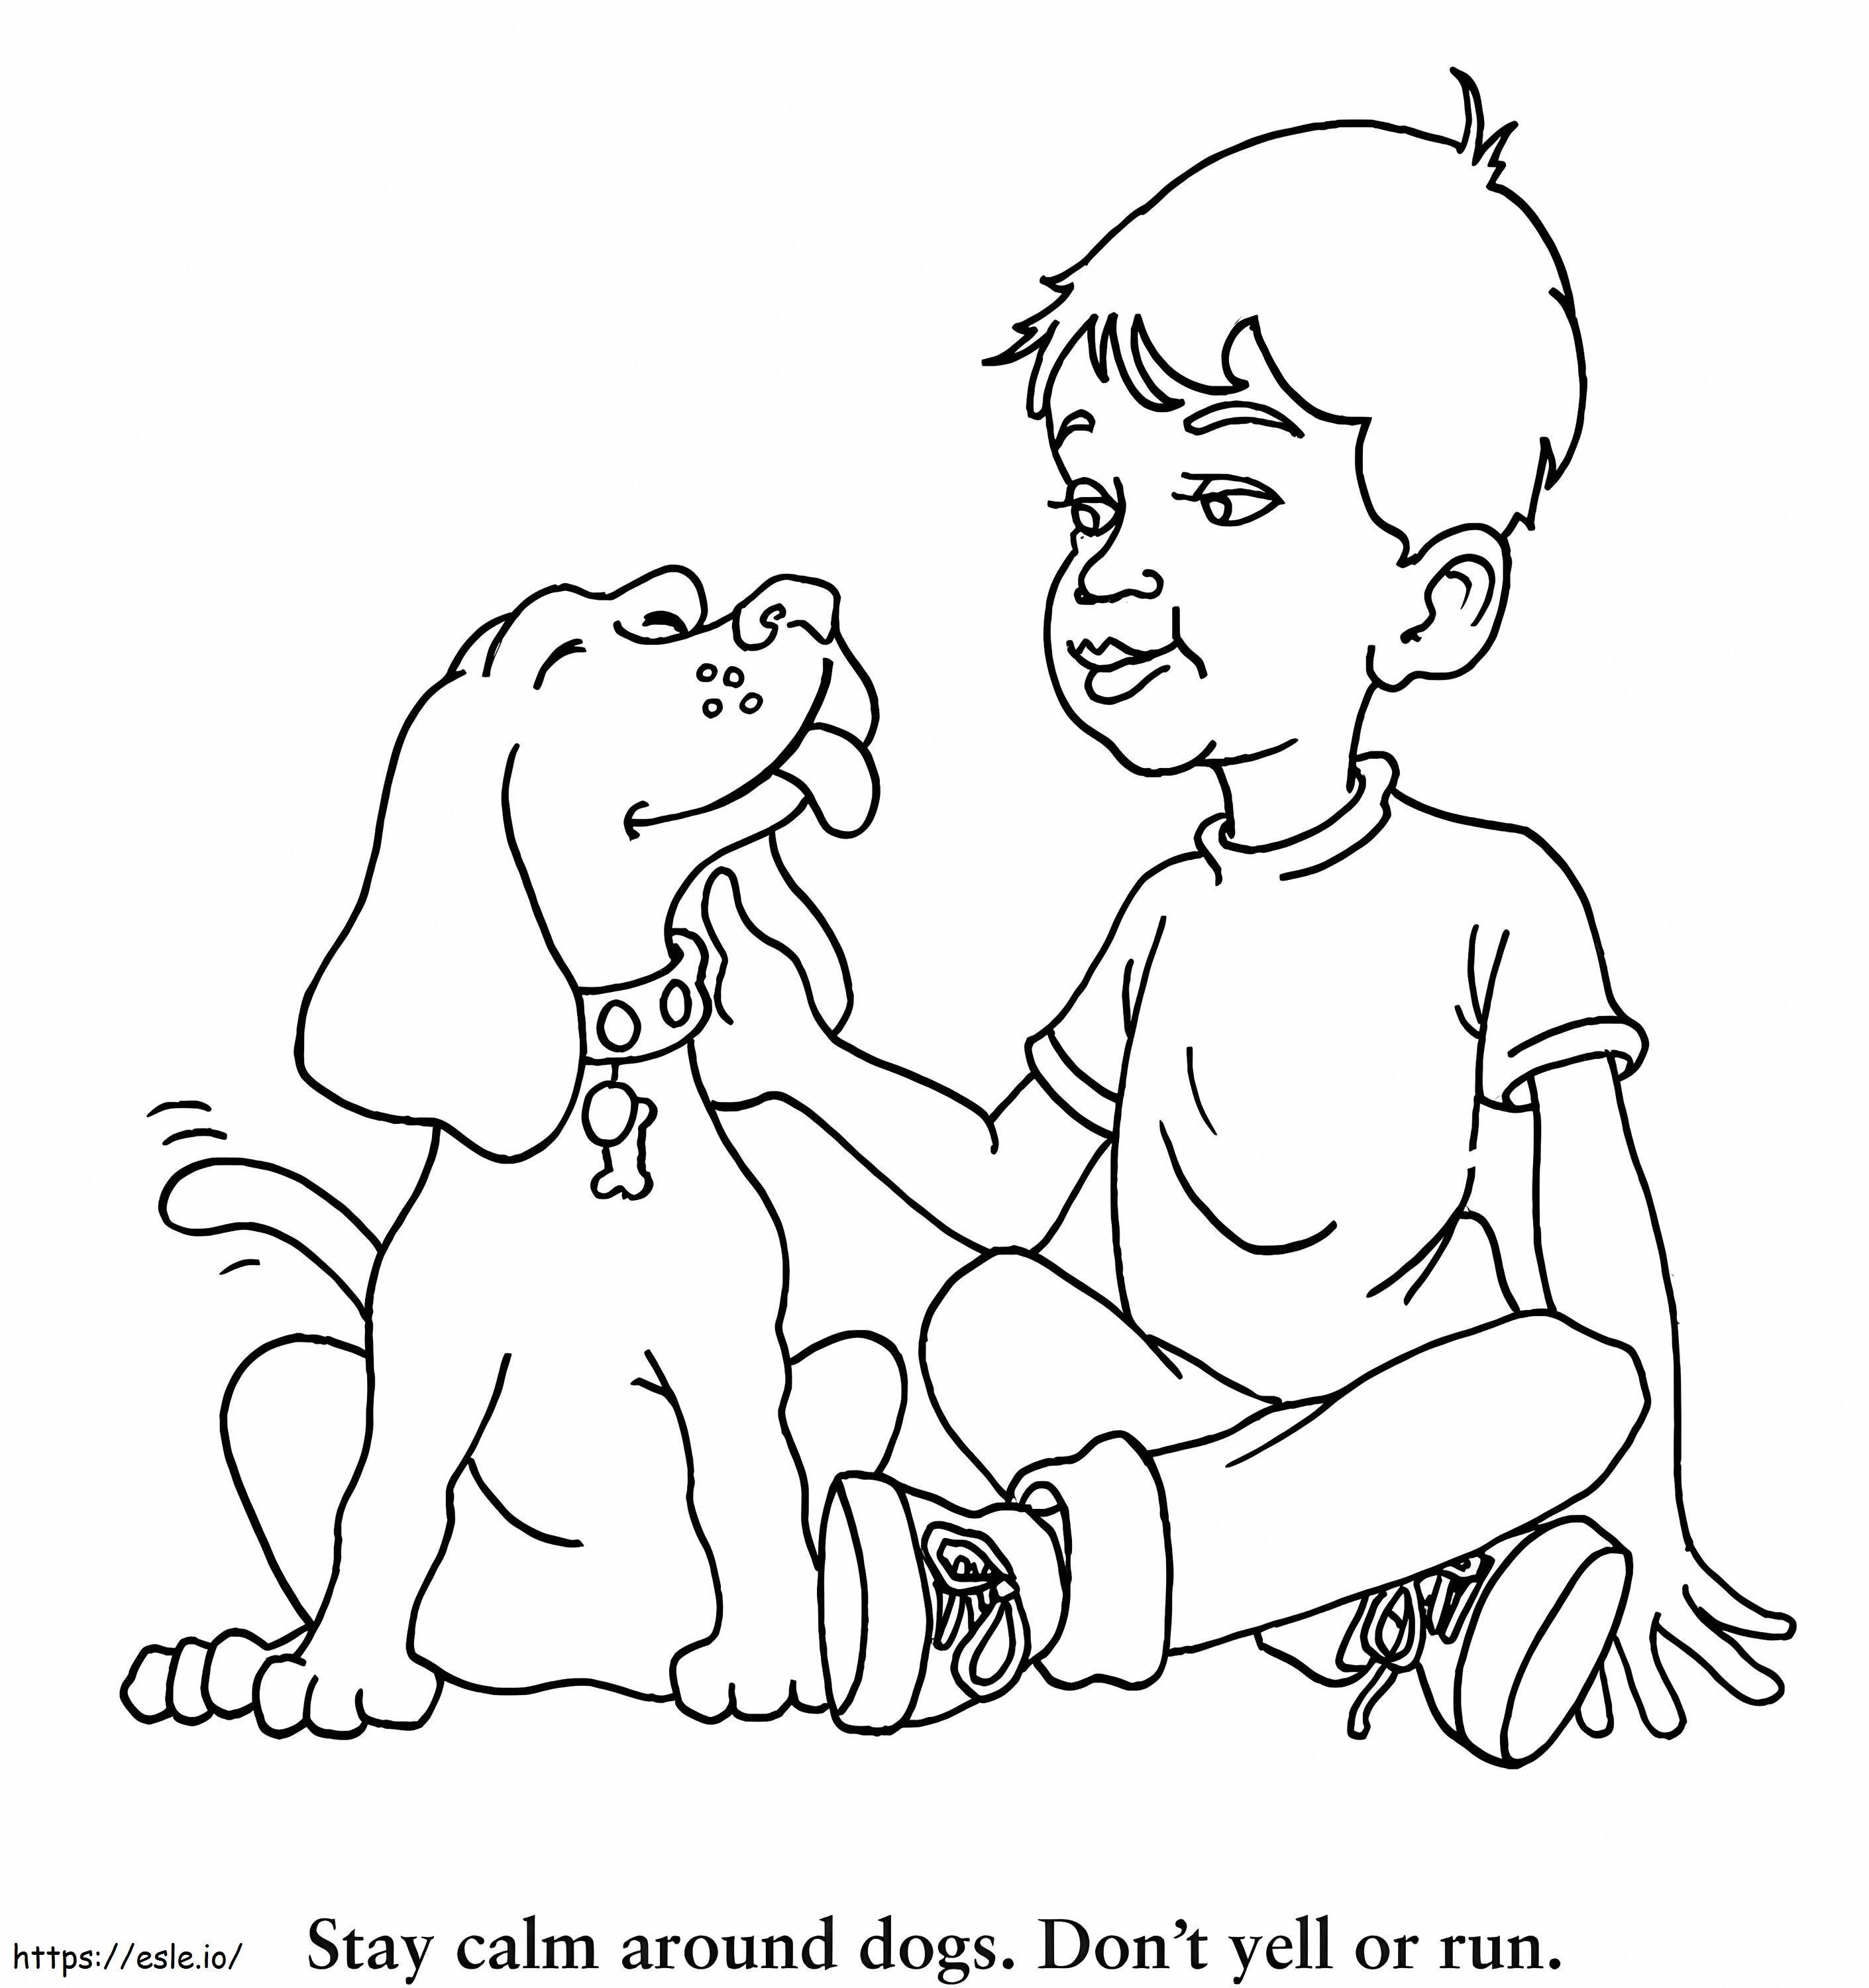 Print Dog Safety coloring page